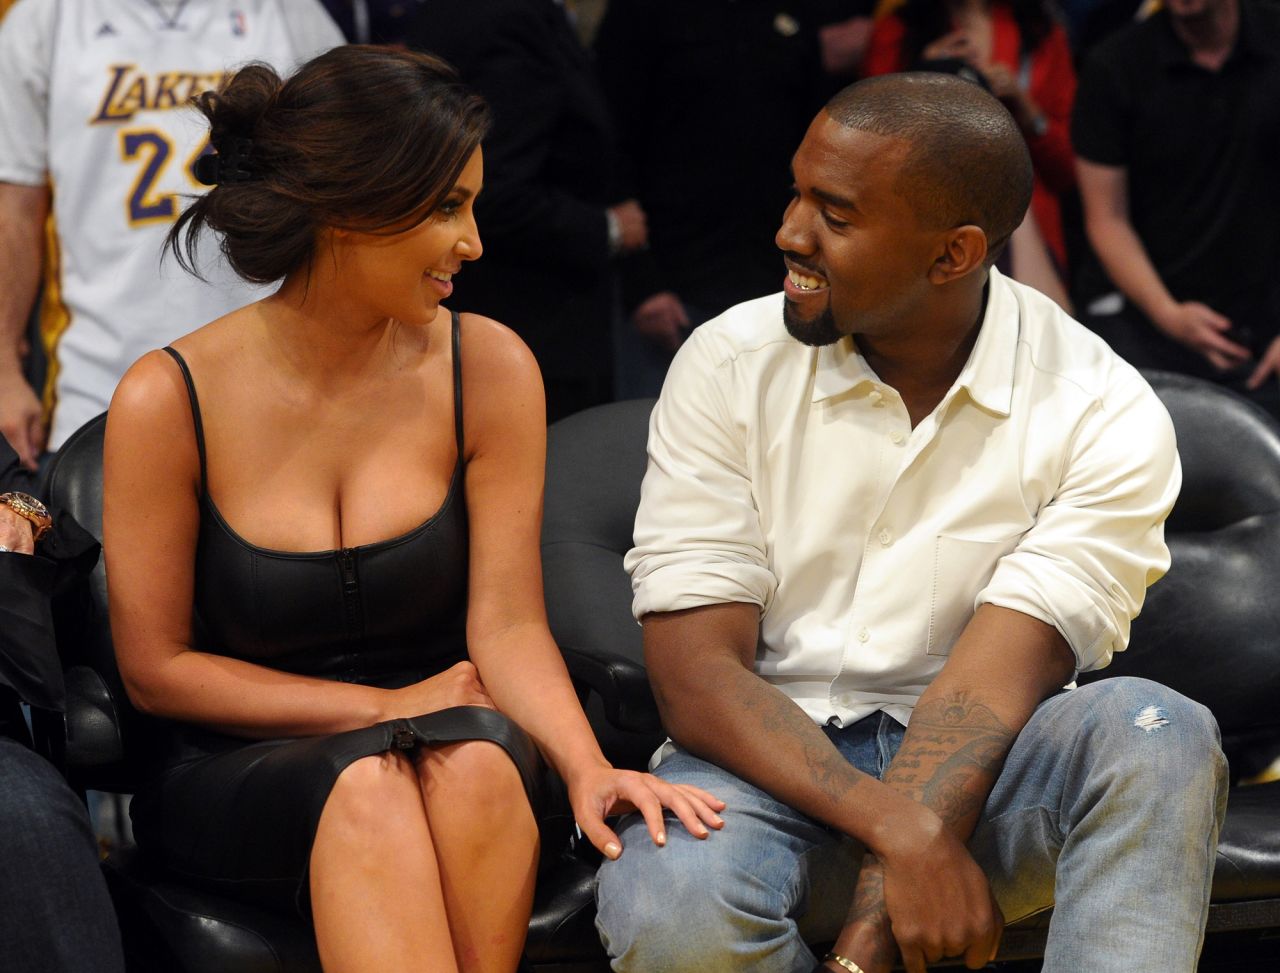 West and Kim Kardashian talk from their courtside seats at an NBA playoff game in 2012. They married in 2014.